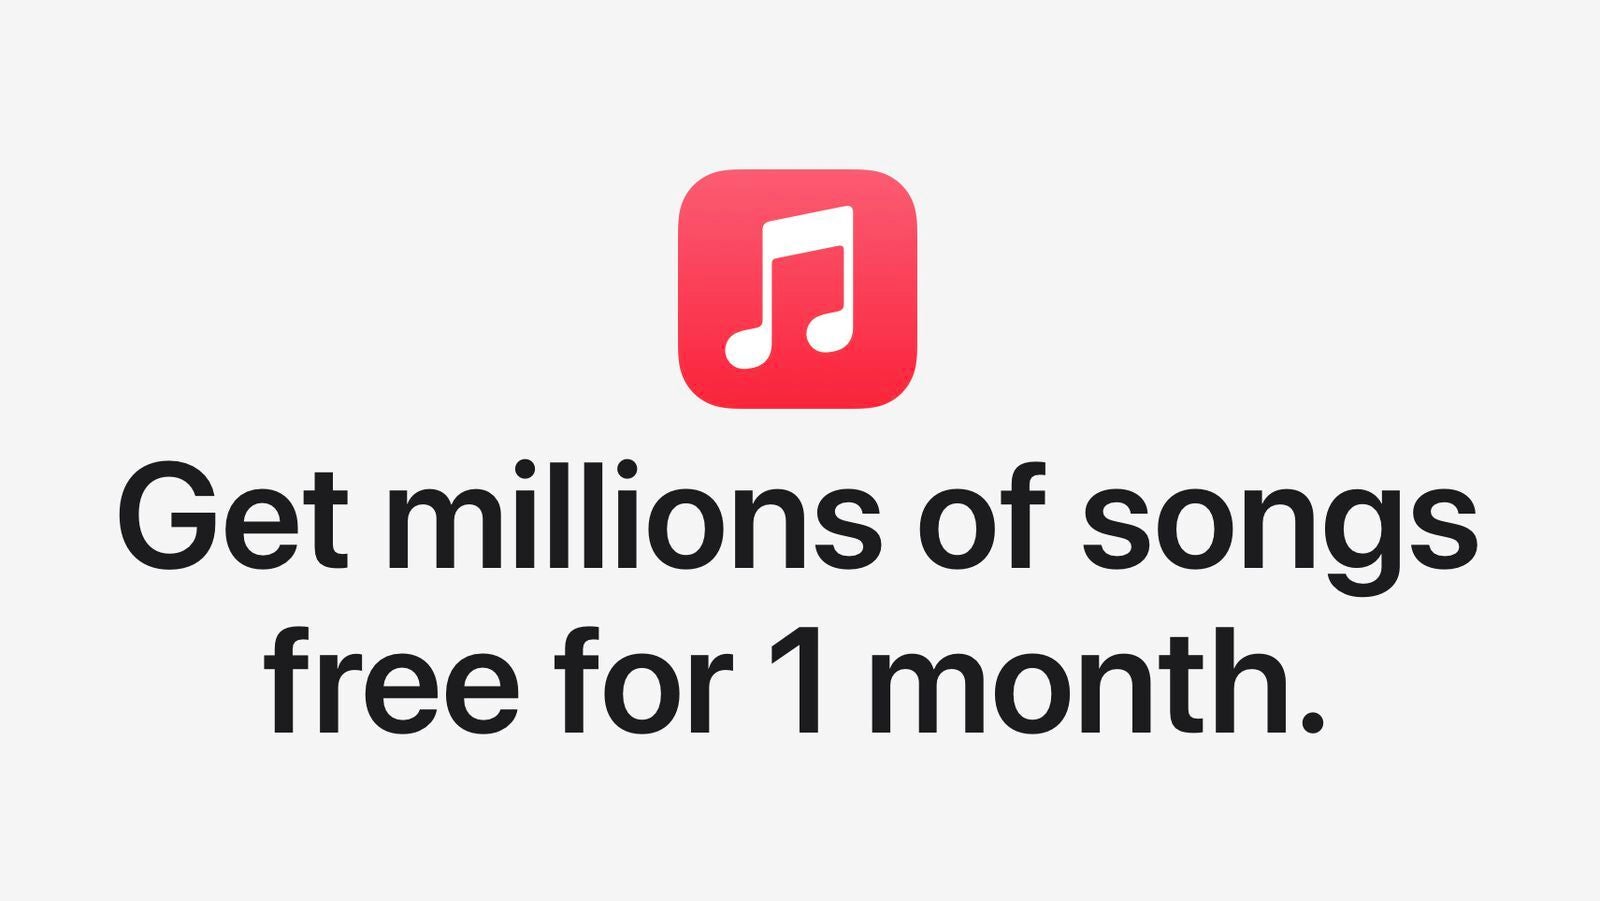 Apple reduces the length of Apple Music's free trial from three-months to one-month - Apple quietly and sharply reduces the free-trial period for Apple Music